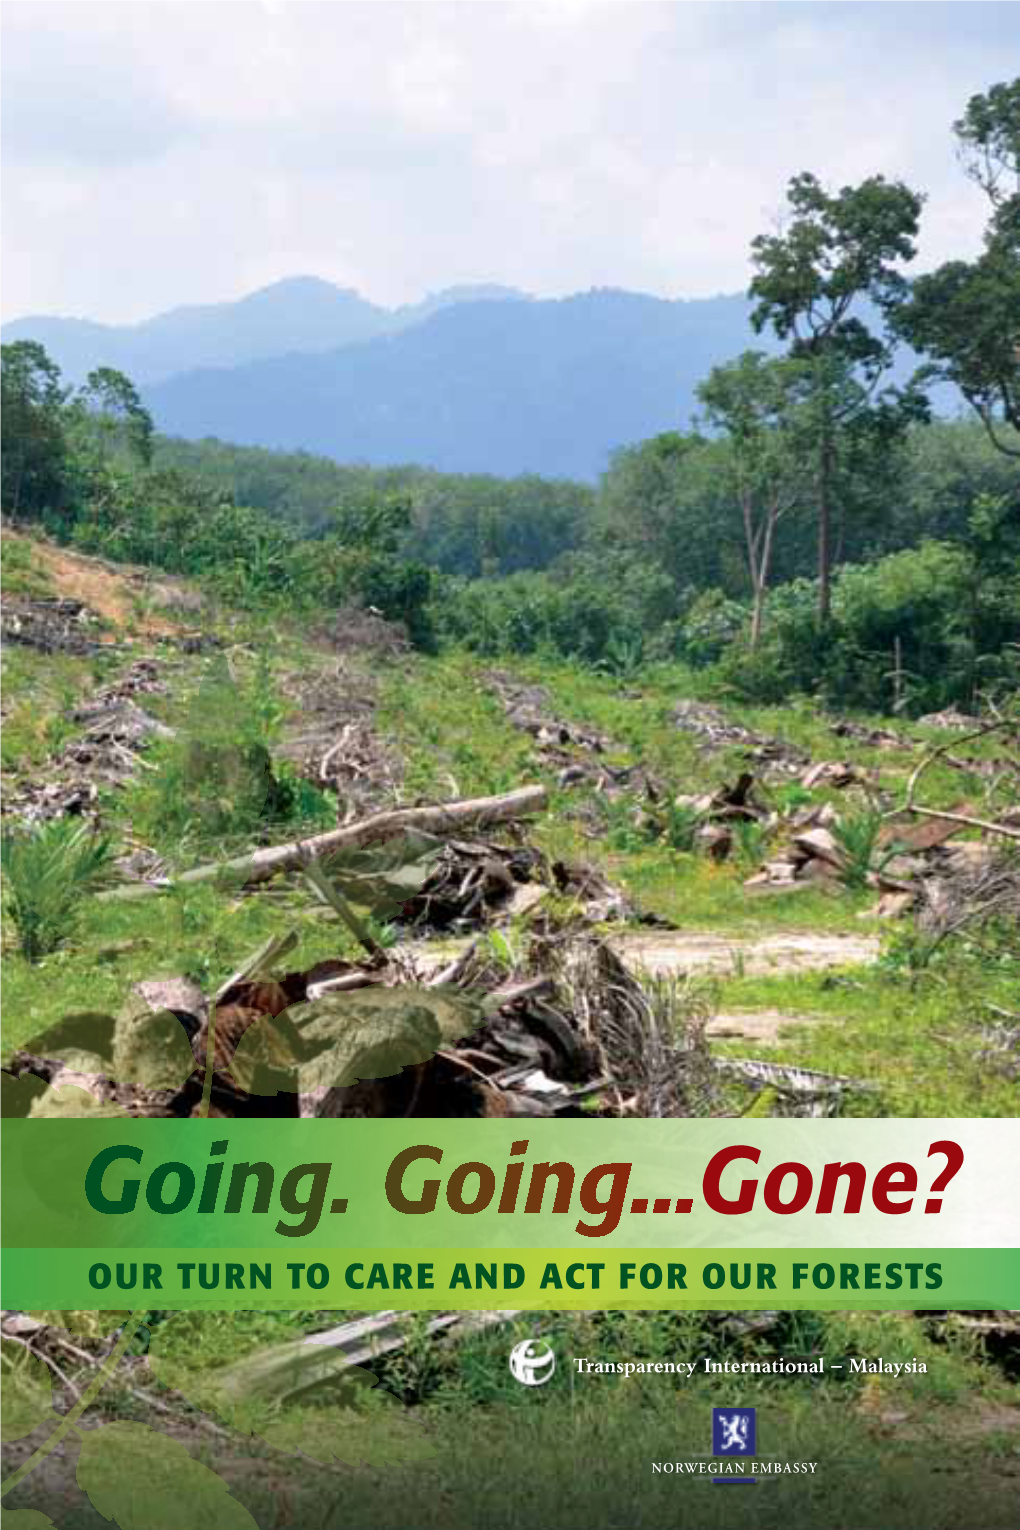 Going. Going...Gone? Our Turn to Care and Act for Our Forests